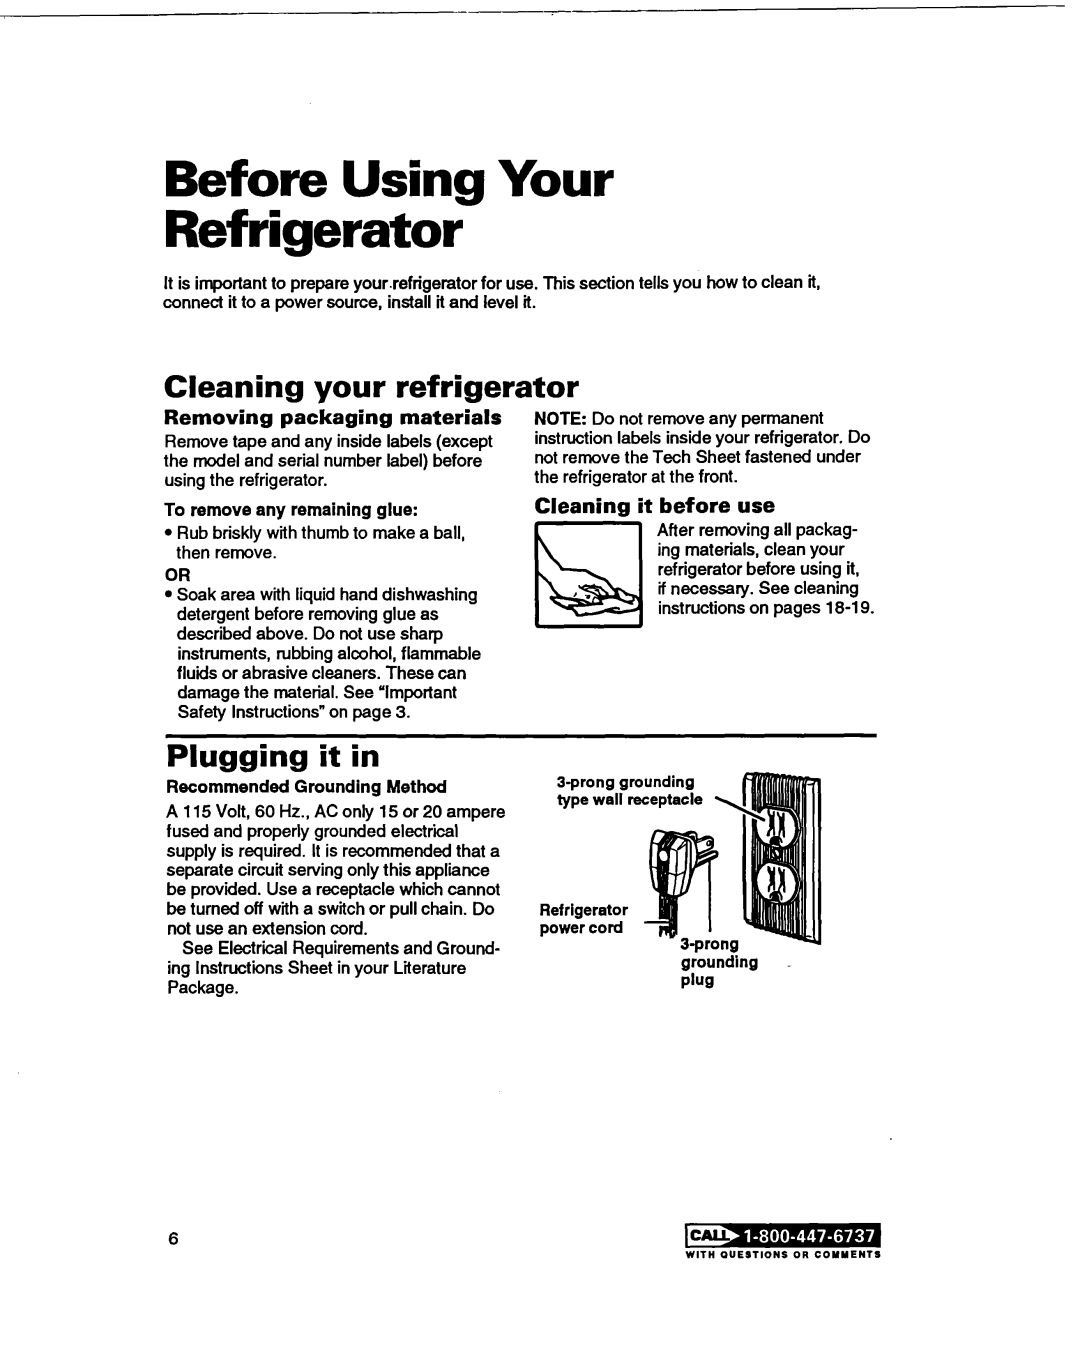 Whirlpool RT20DKXDN00 warranty Before Using Your Refrigerator, Cleaning your refrigerator, Plugging it in, it before use 